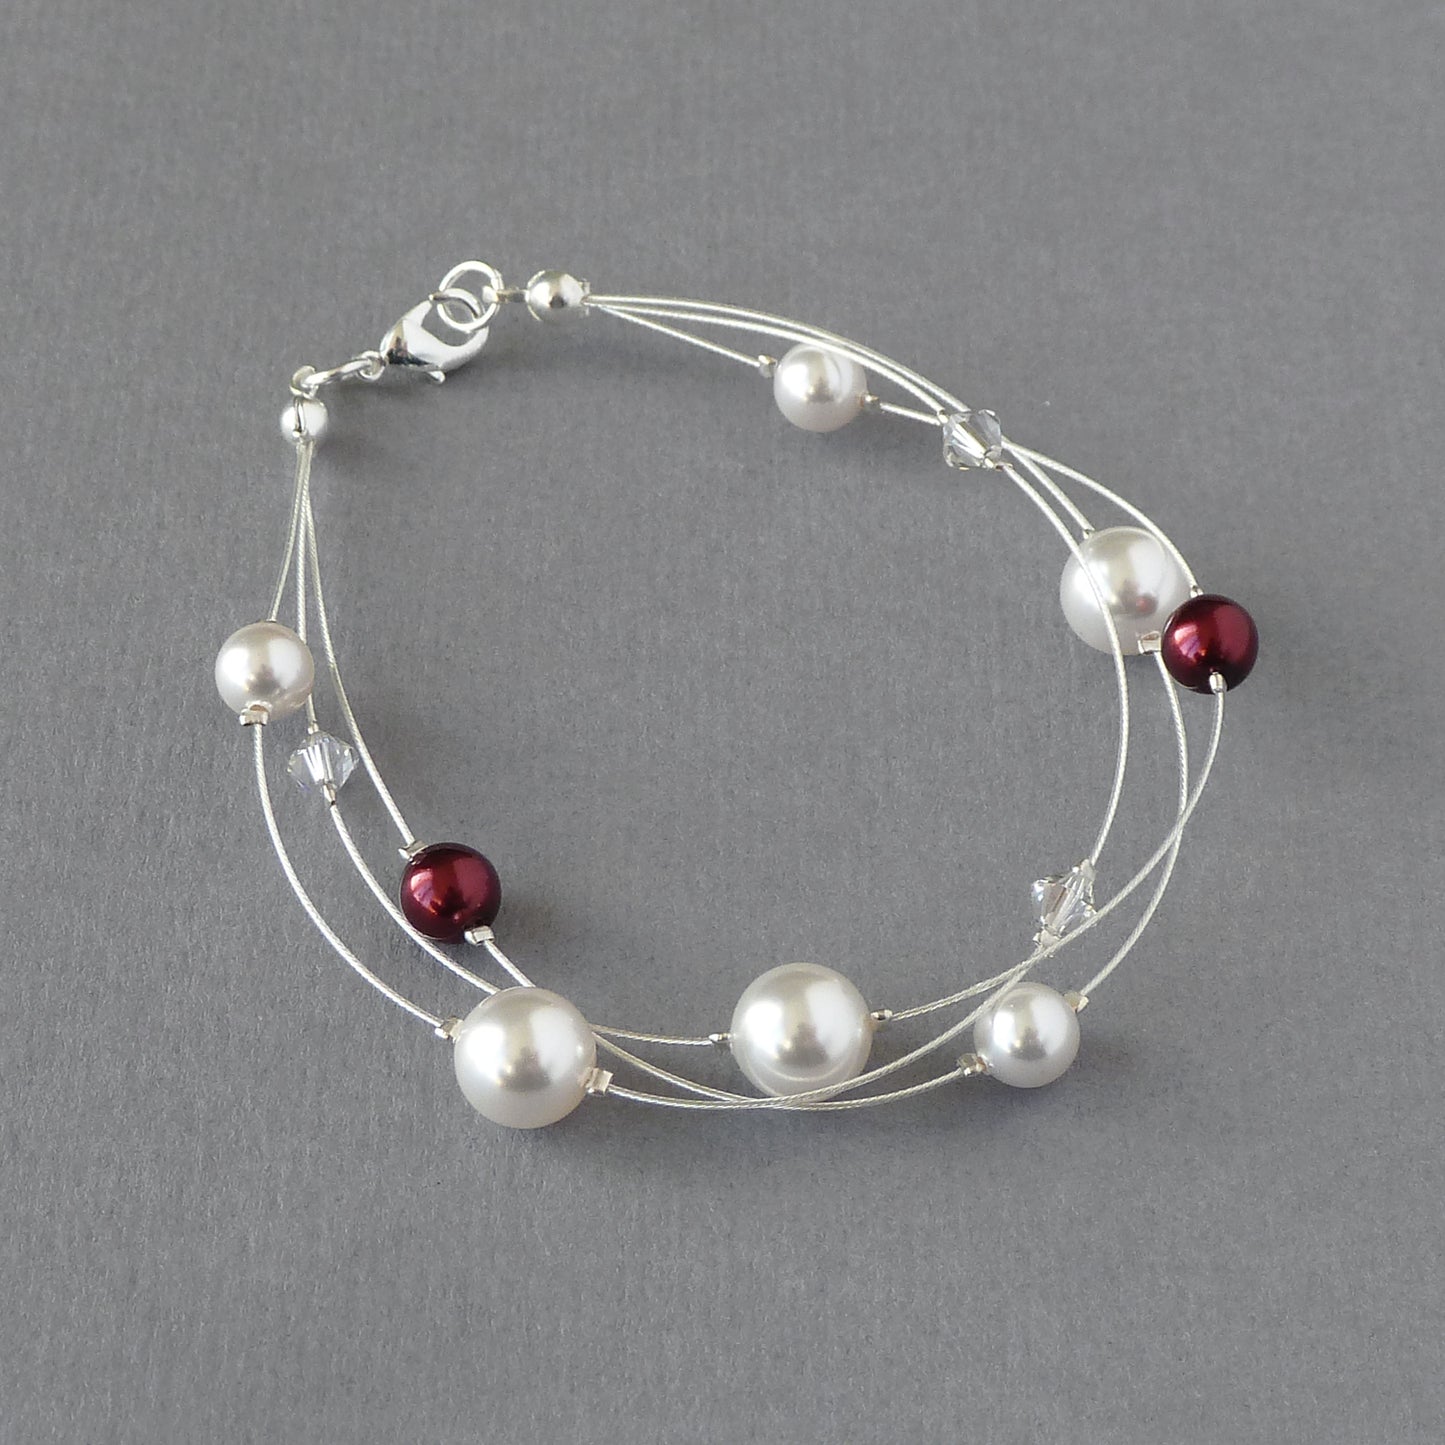 White and dark red floating pearl bracelet